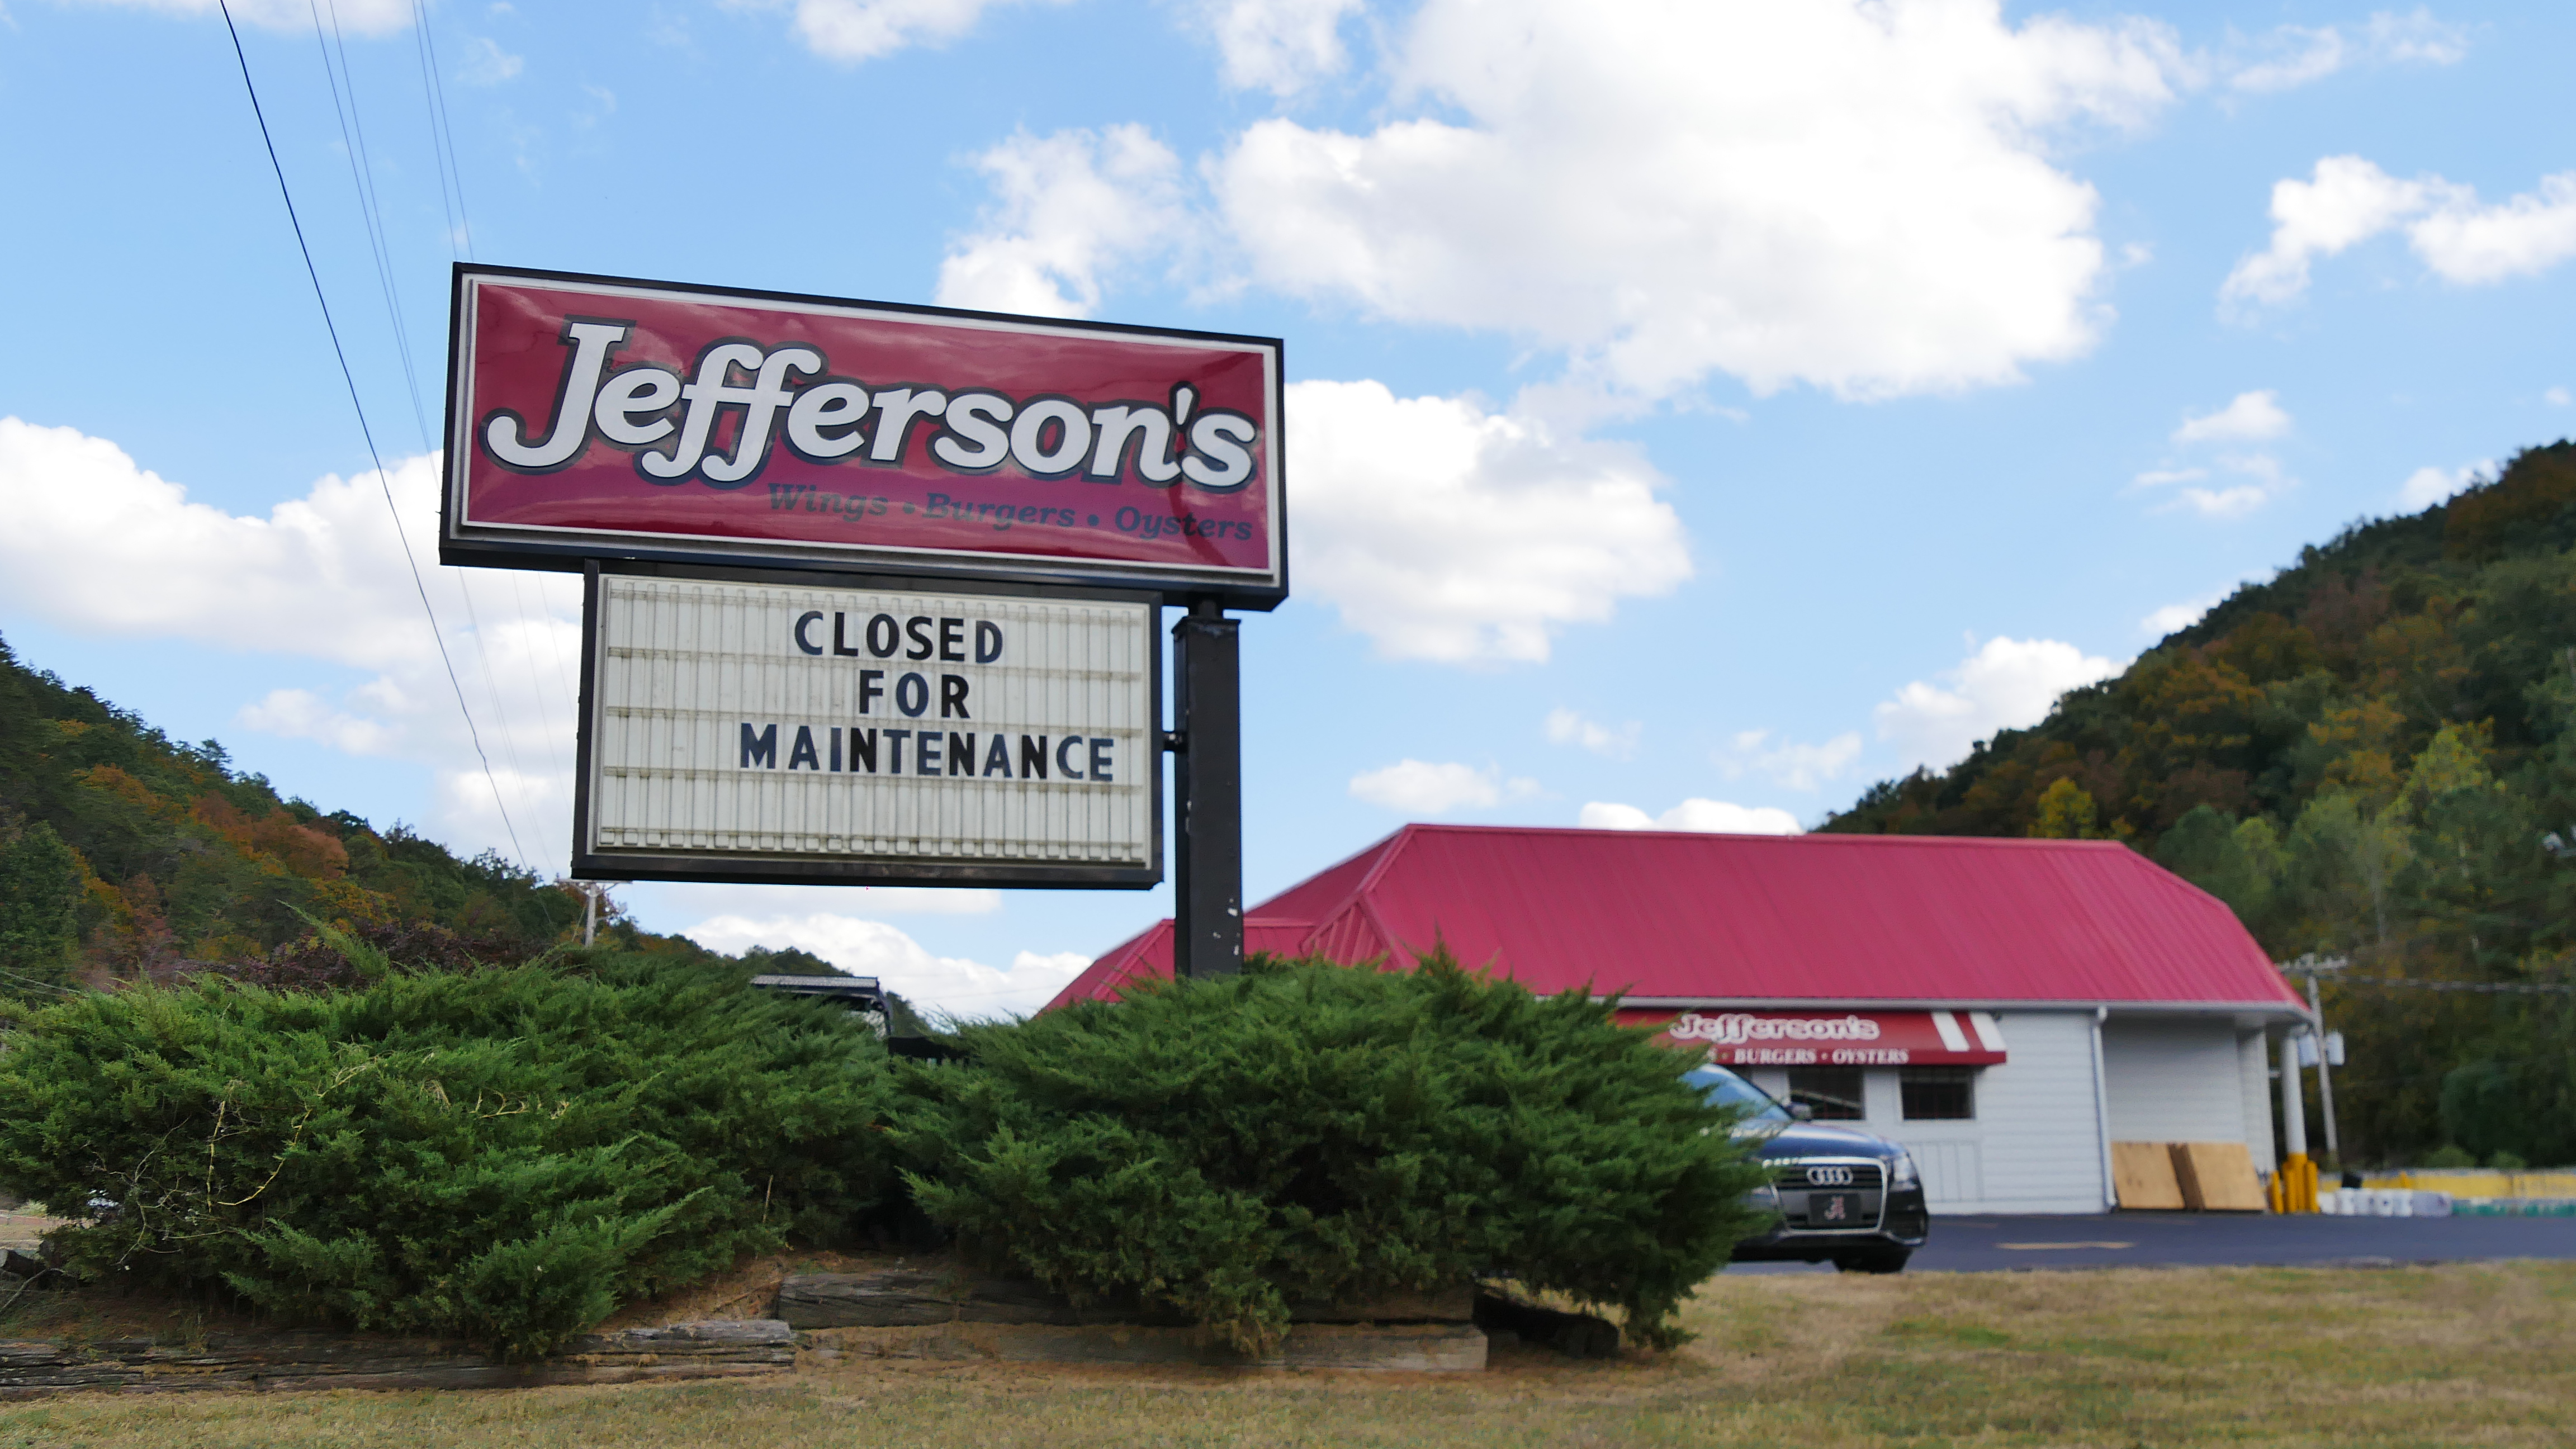 Jefferson's to reopen in two weeks after fire